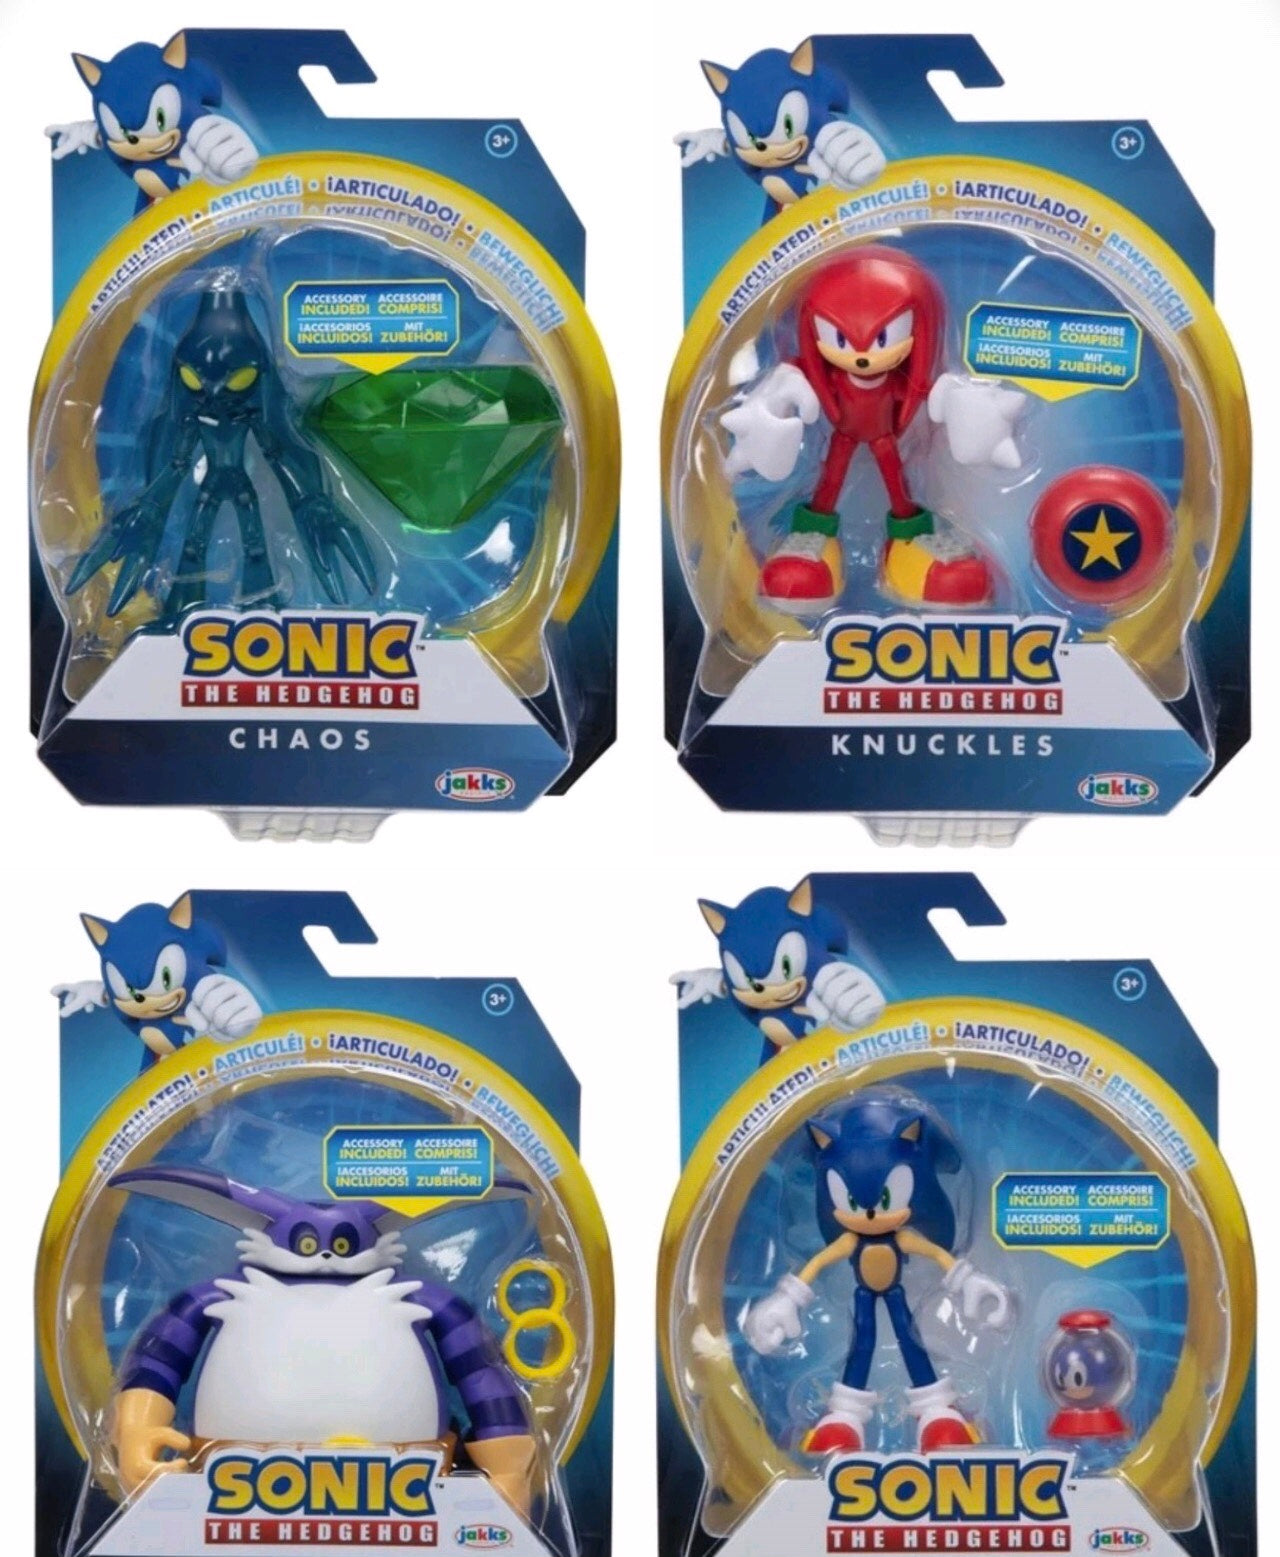 Sonic the Hedgehog 4-Inch Action Figures with Accessory Wave 10 Case of 6